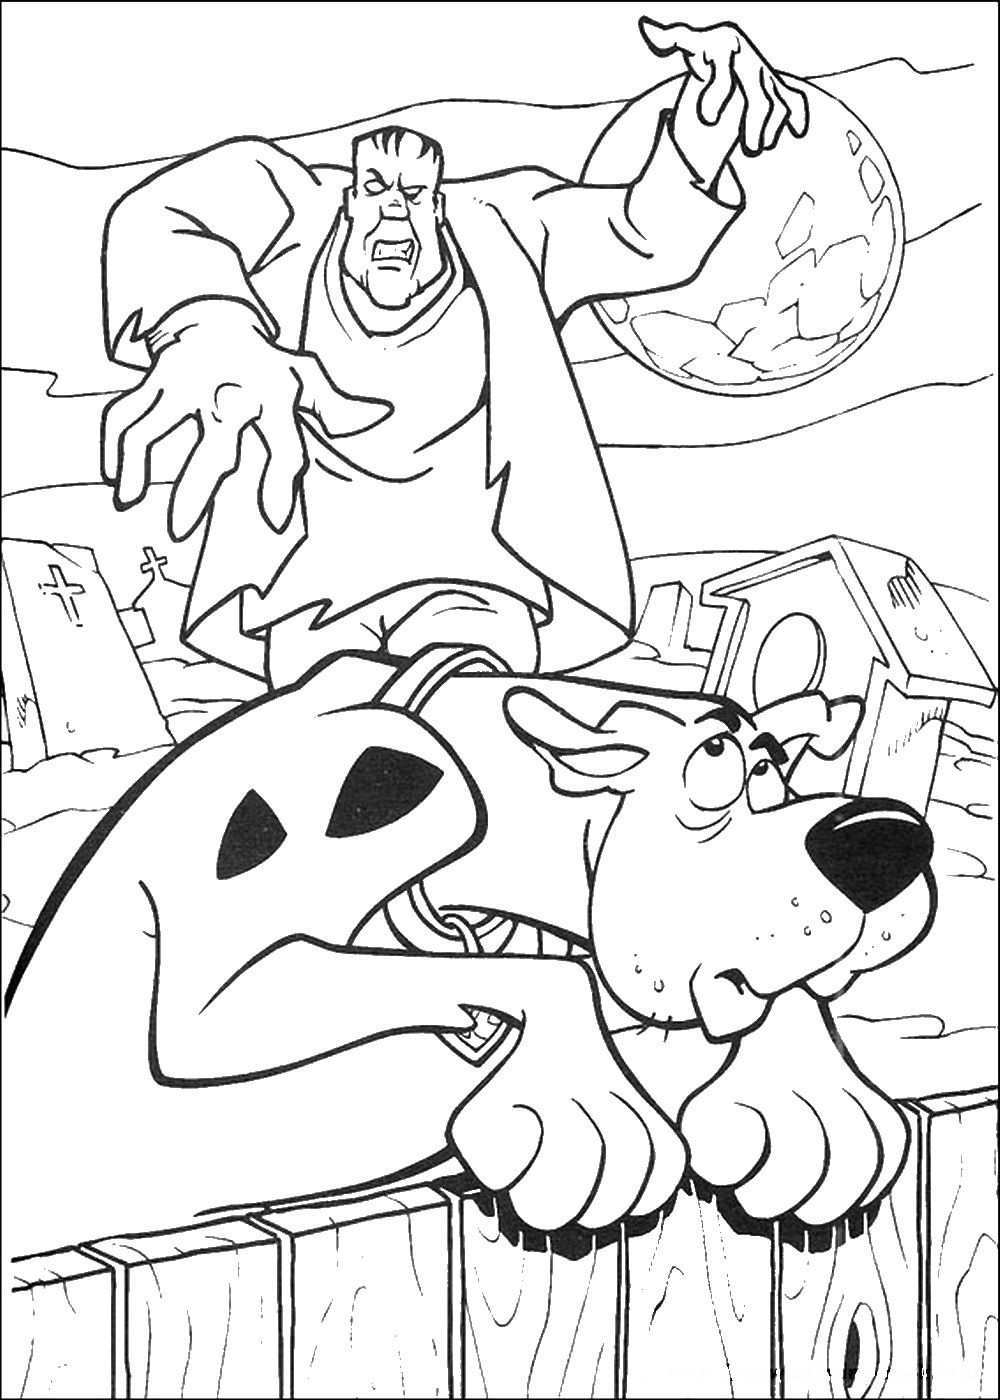 Coloring Pages Scooby Doo Free Coloring Pages Of Scooby Doo Scooby Doo Coloring Pages